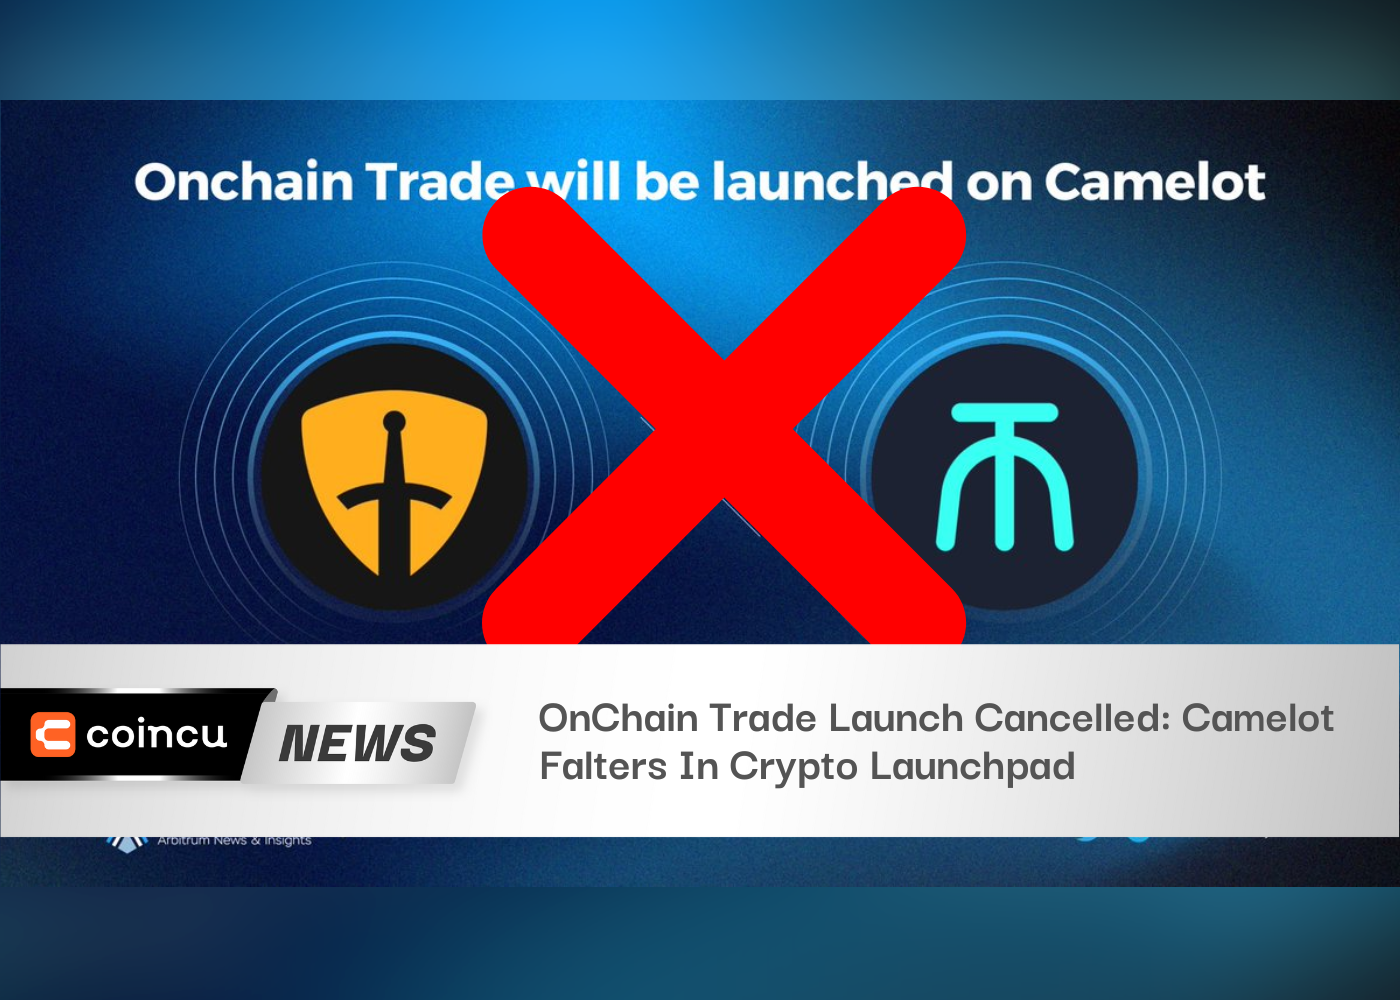 OnChain Trade Launch Cancelled: Camelot Falters In Crypto Launchpad